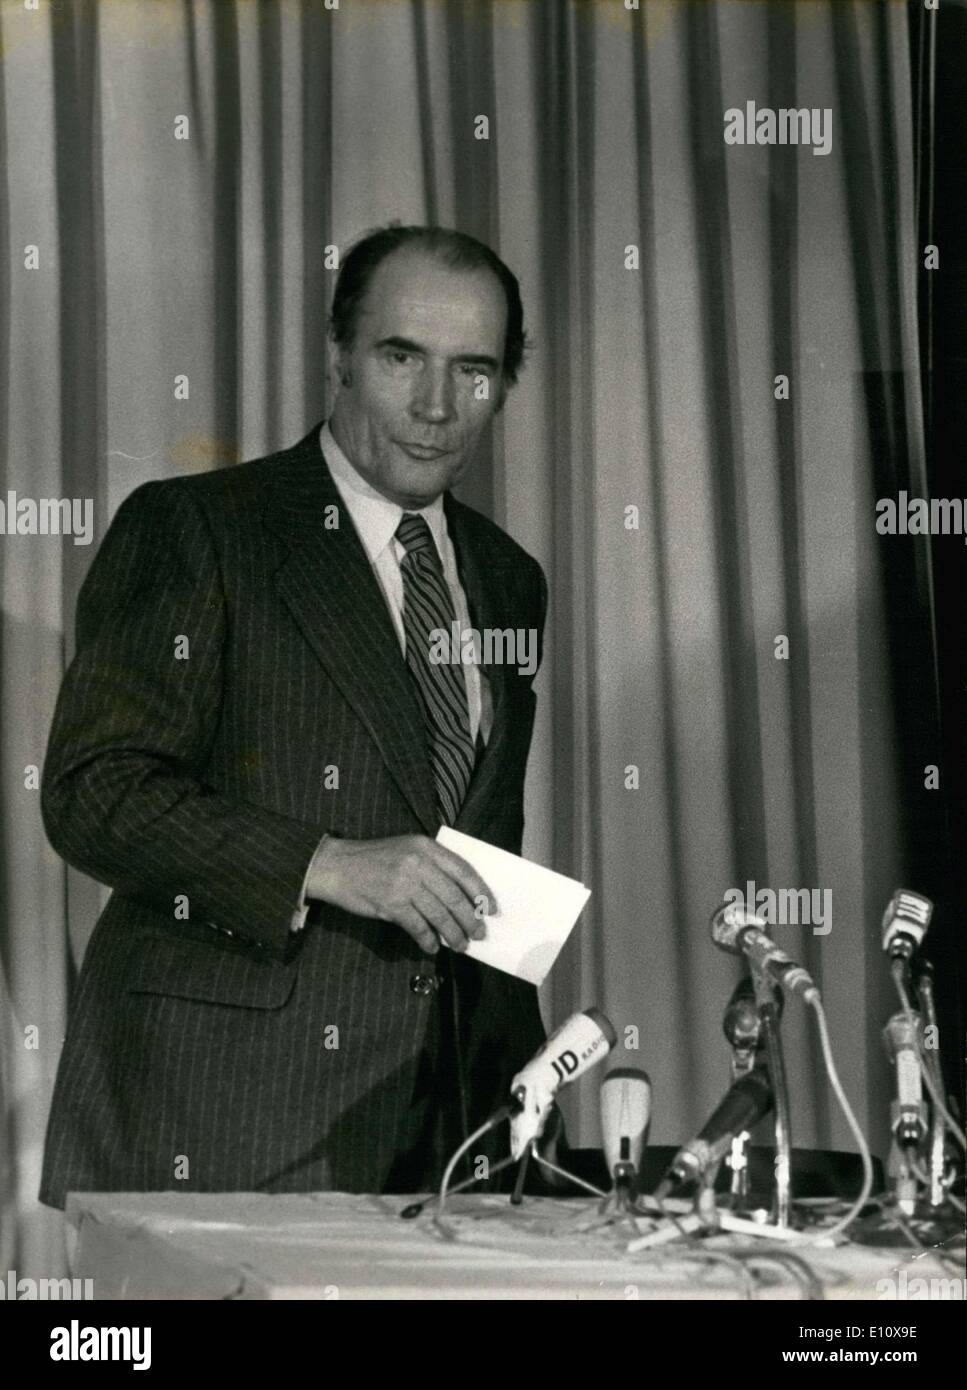 May 06, 1974 - With more than 43% of the votes, the Left's candidate Francois Mitterrand finds himself neck and neck with Valery Giscard D'Estaing in the second rounds of the presidential election. Late in the night, Mitterrand held a press conference at his Paris headquarters to comment on the results from the first round of presidential elections. Stock Photo